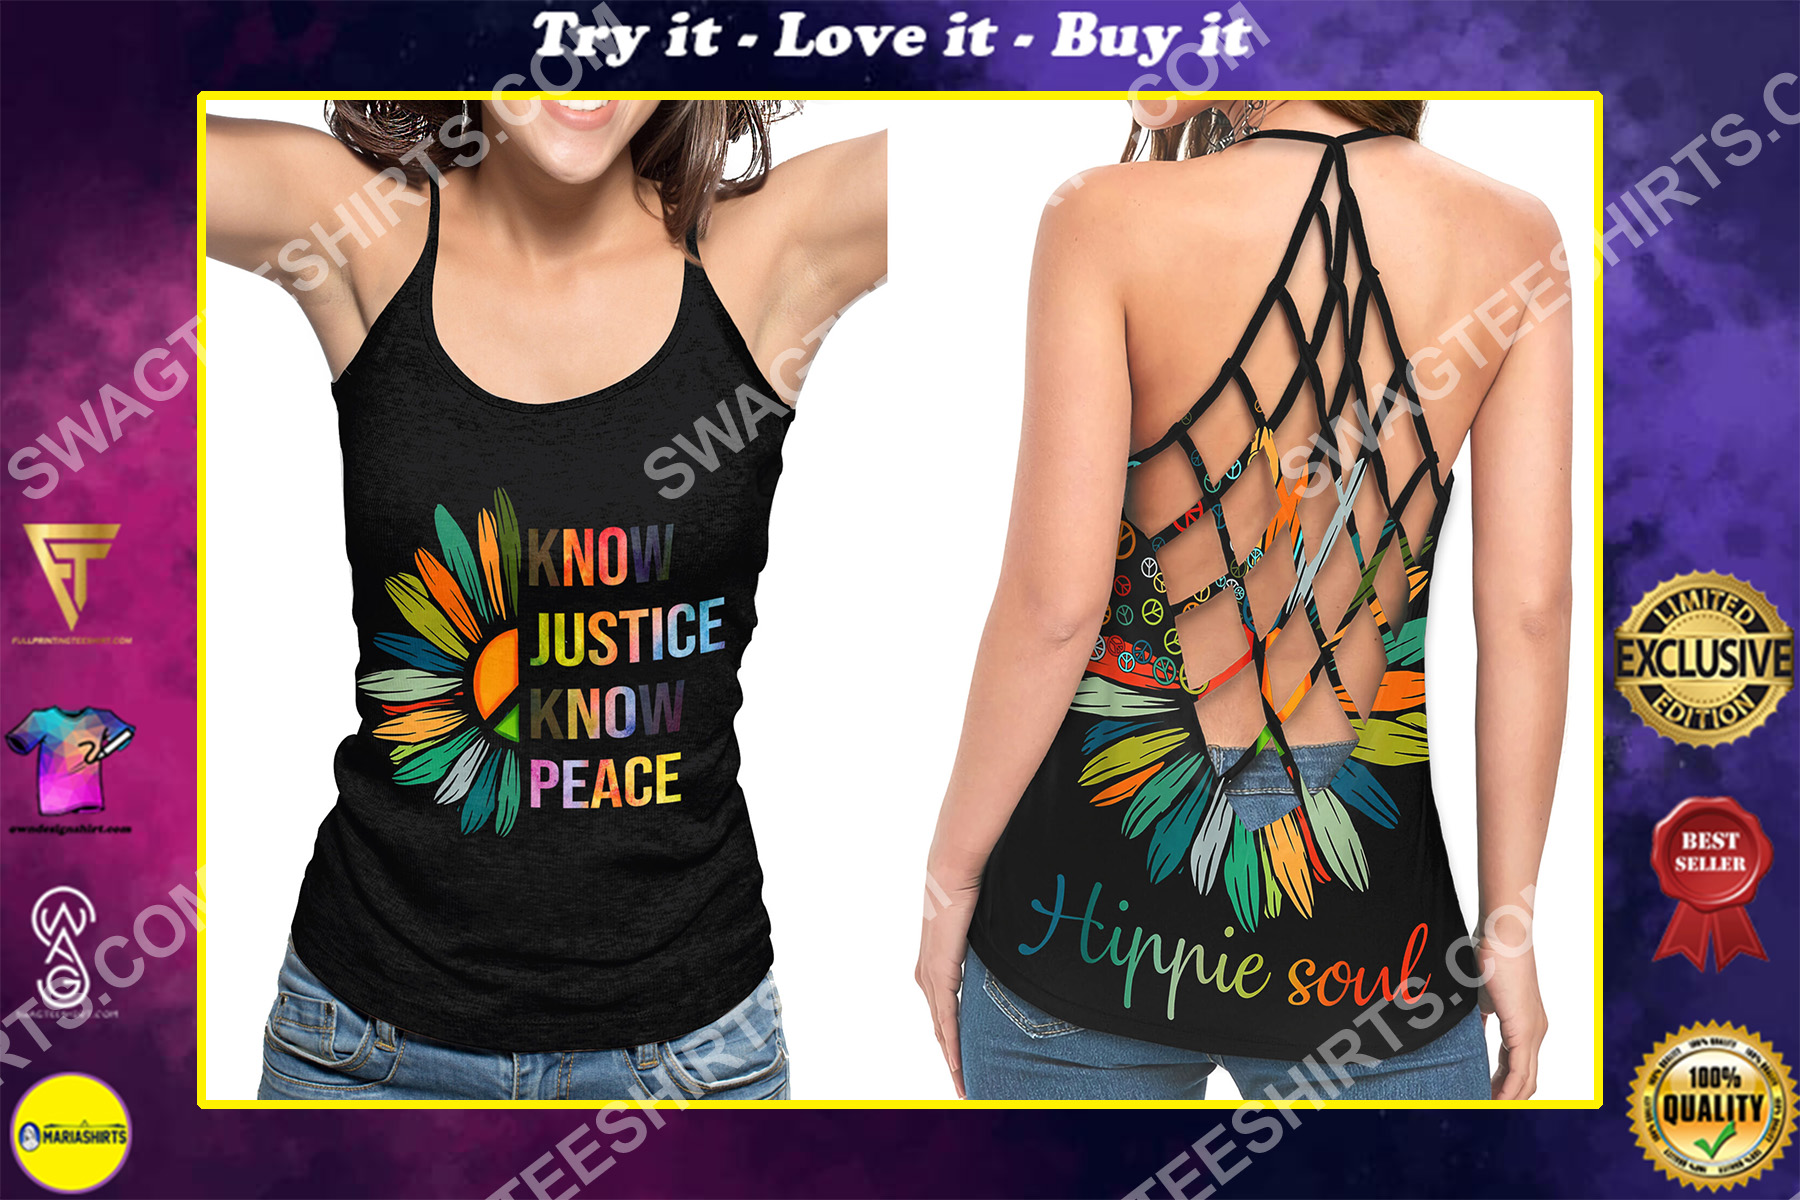 hippie soul know justice know peace flower strappy back tank top